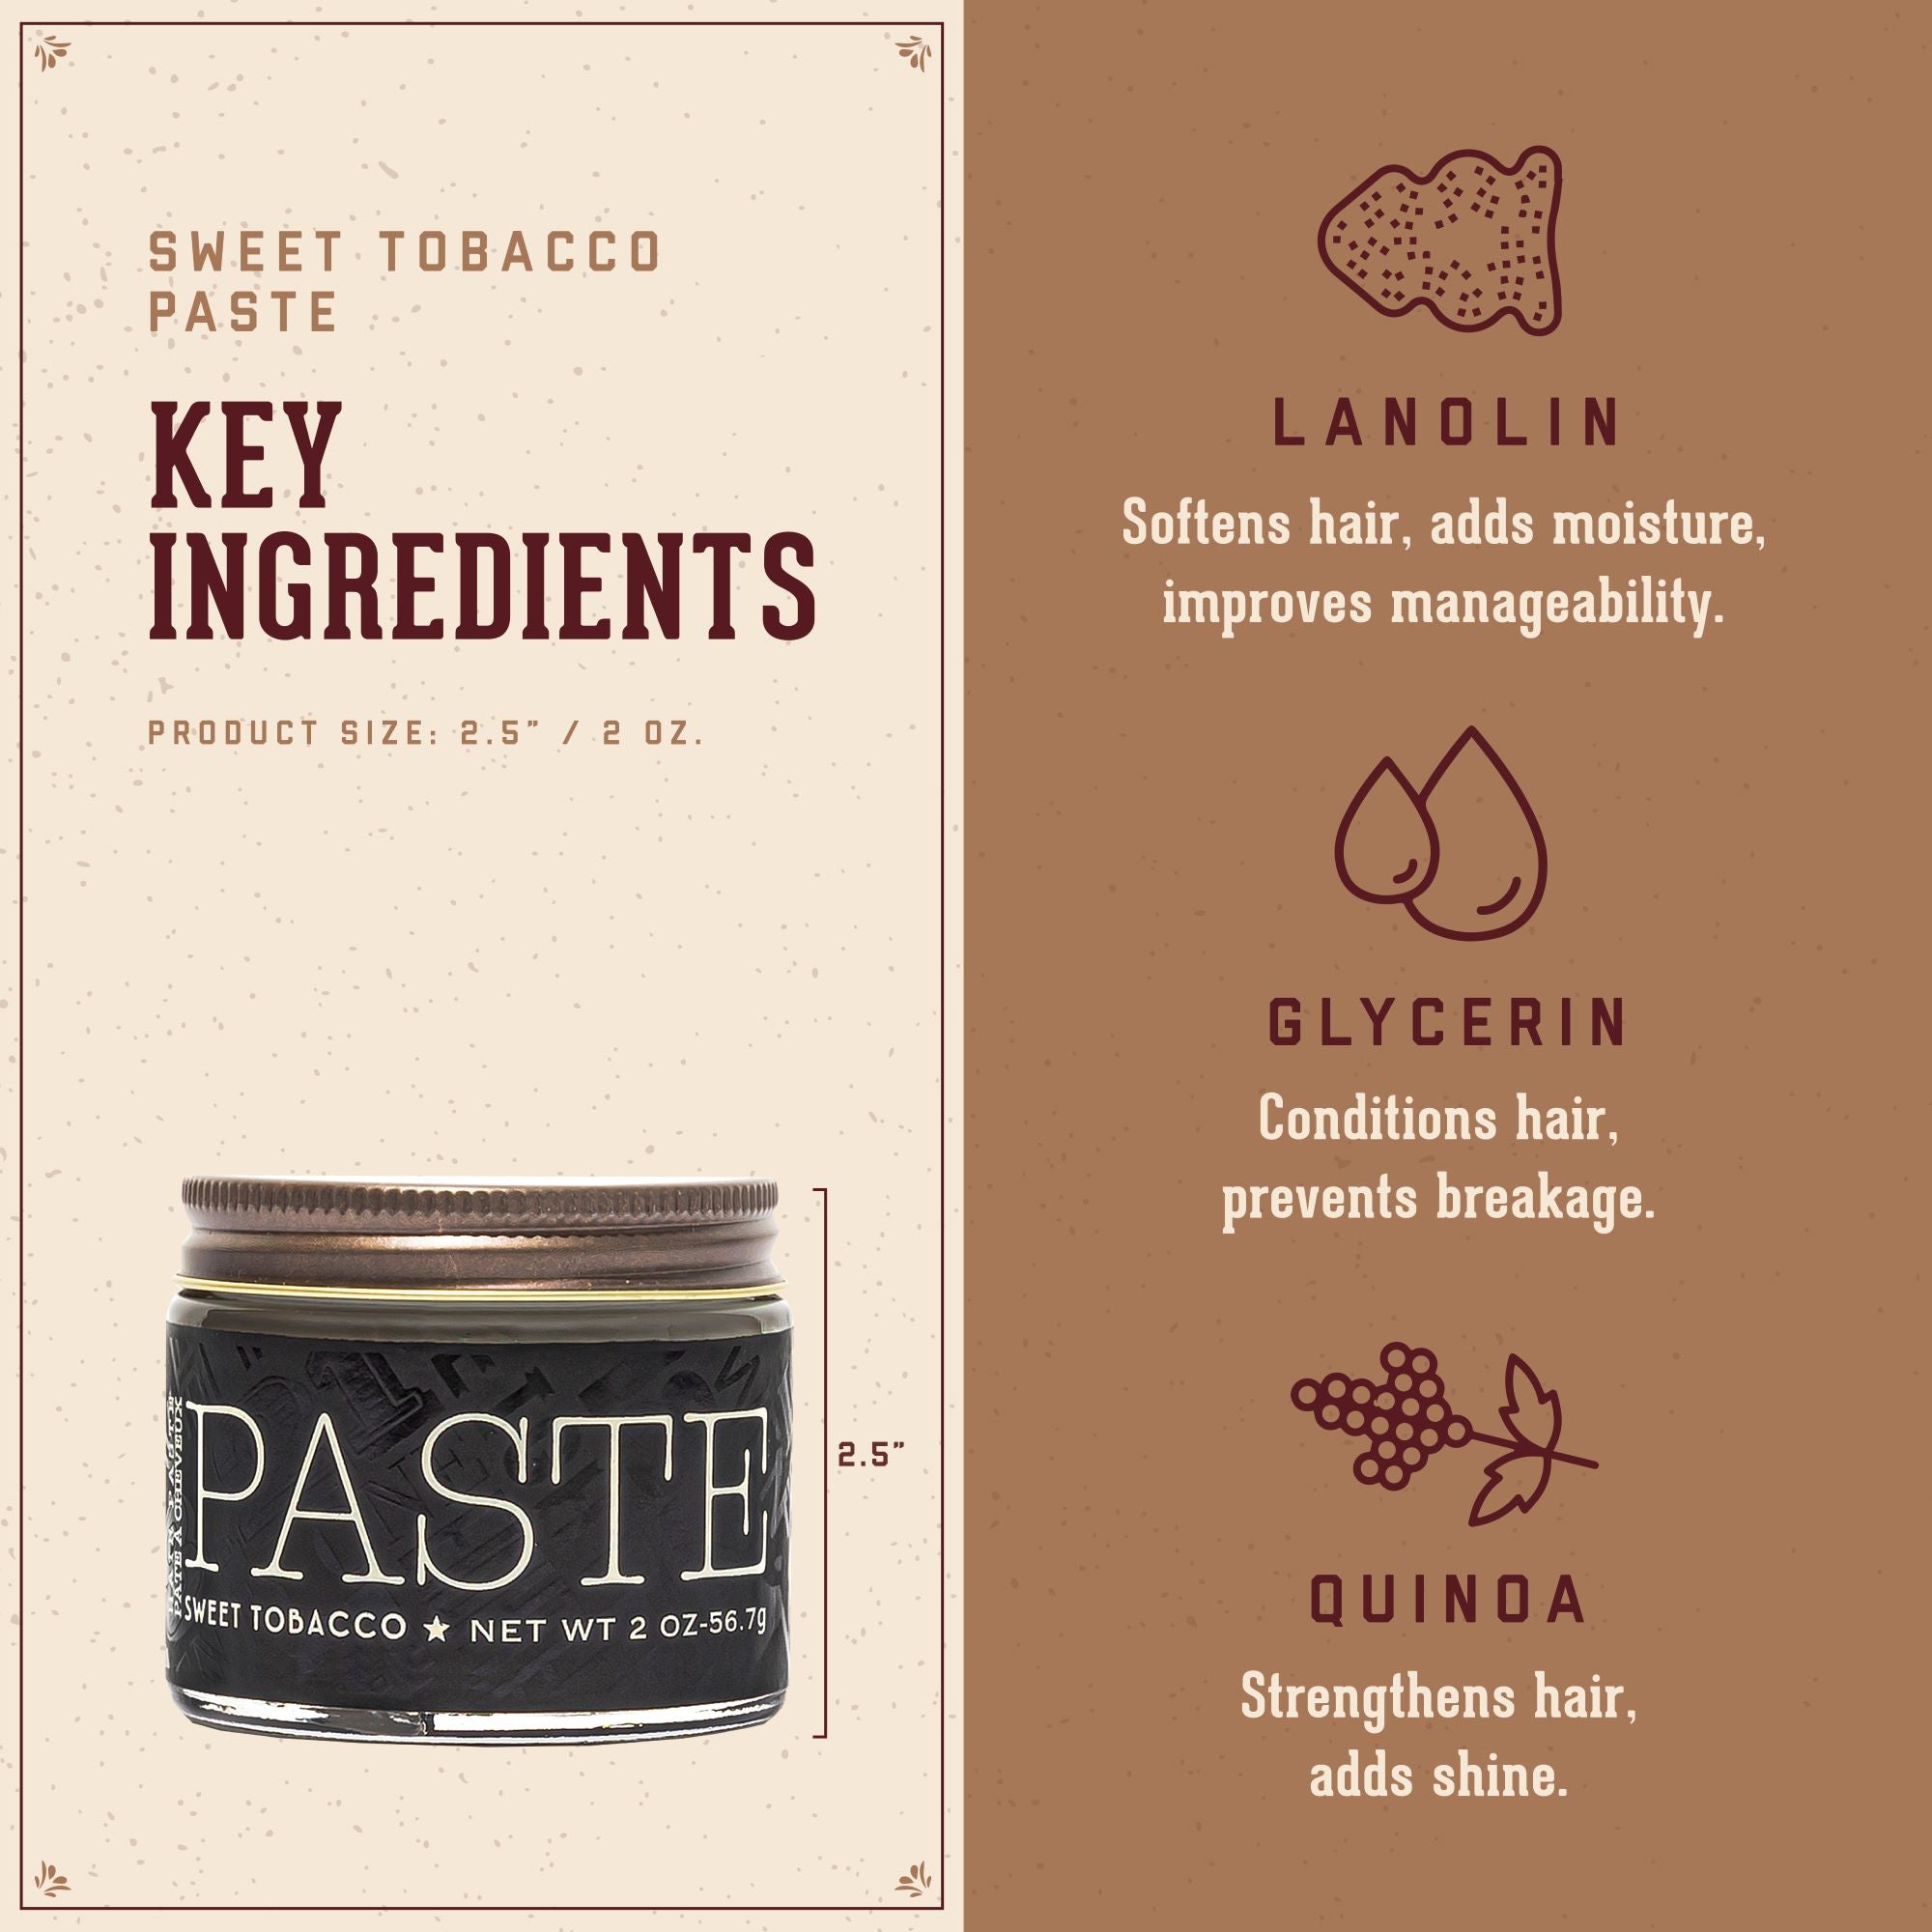 Sweet Tobacco Paste Key Ingredients.  1. Lanolin: softens hair, adds moisture, improves manageability.  2. Glycerin: conditions ahir, prevents breakage.  3. Quinoa:  strengthens hair, adds shine.